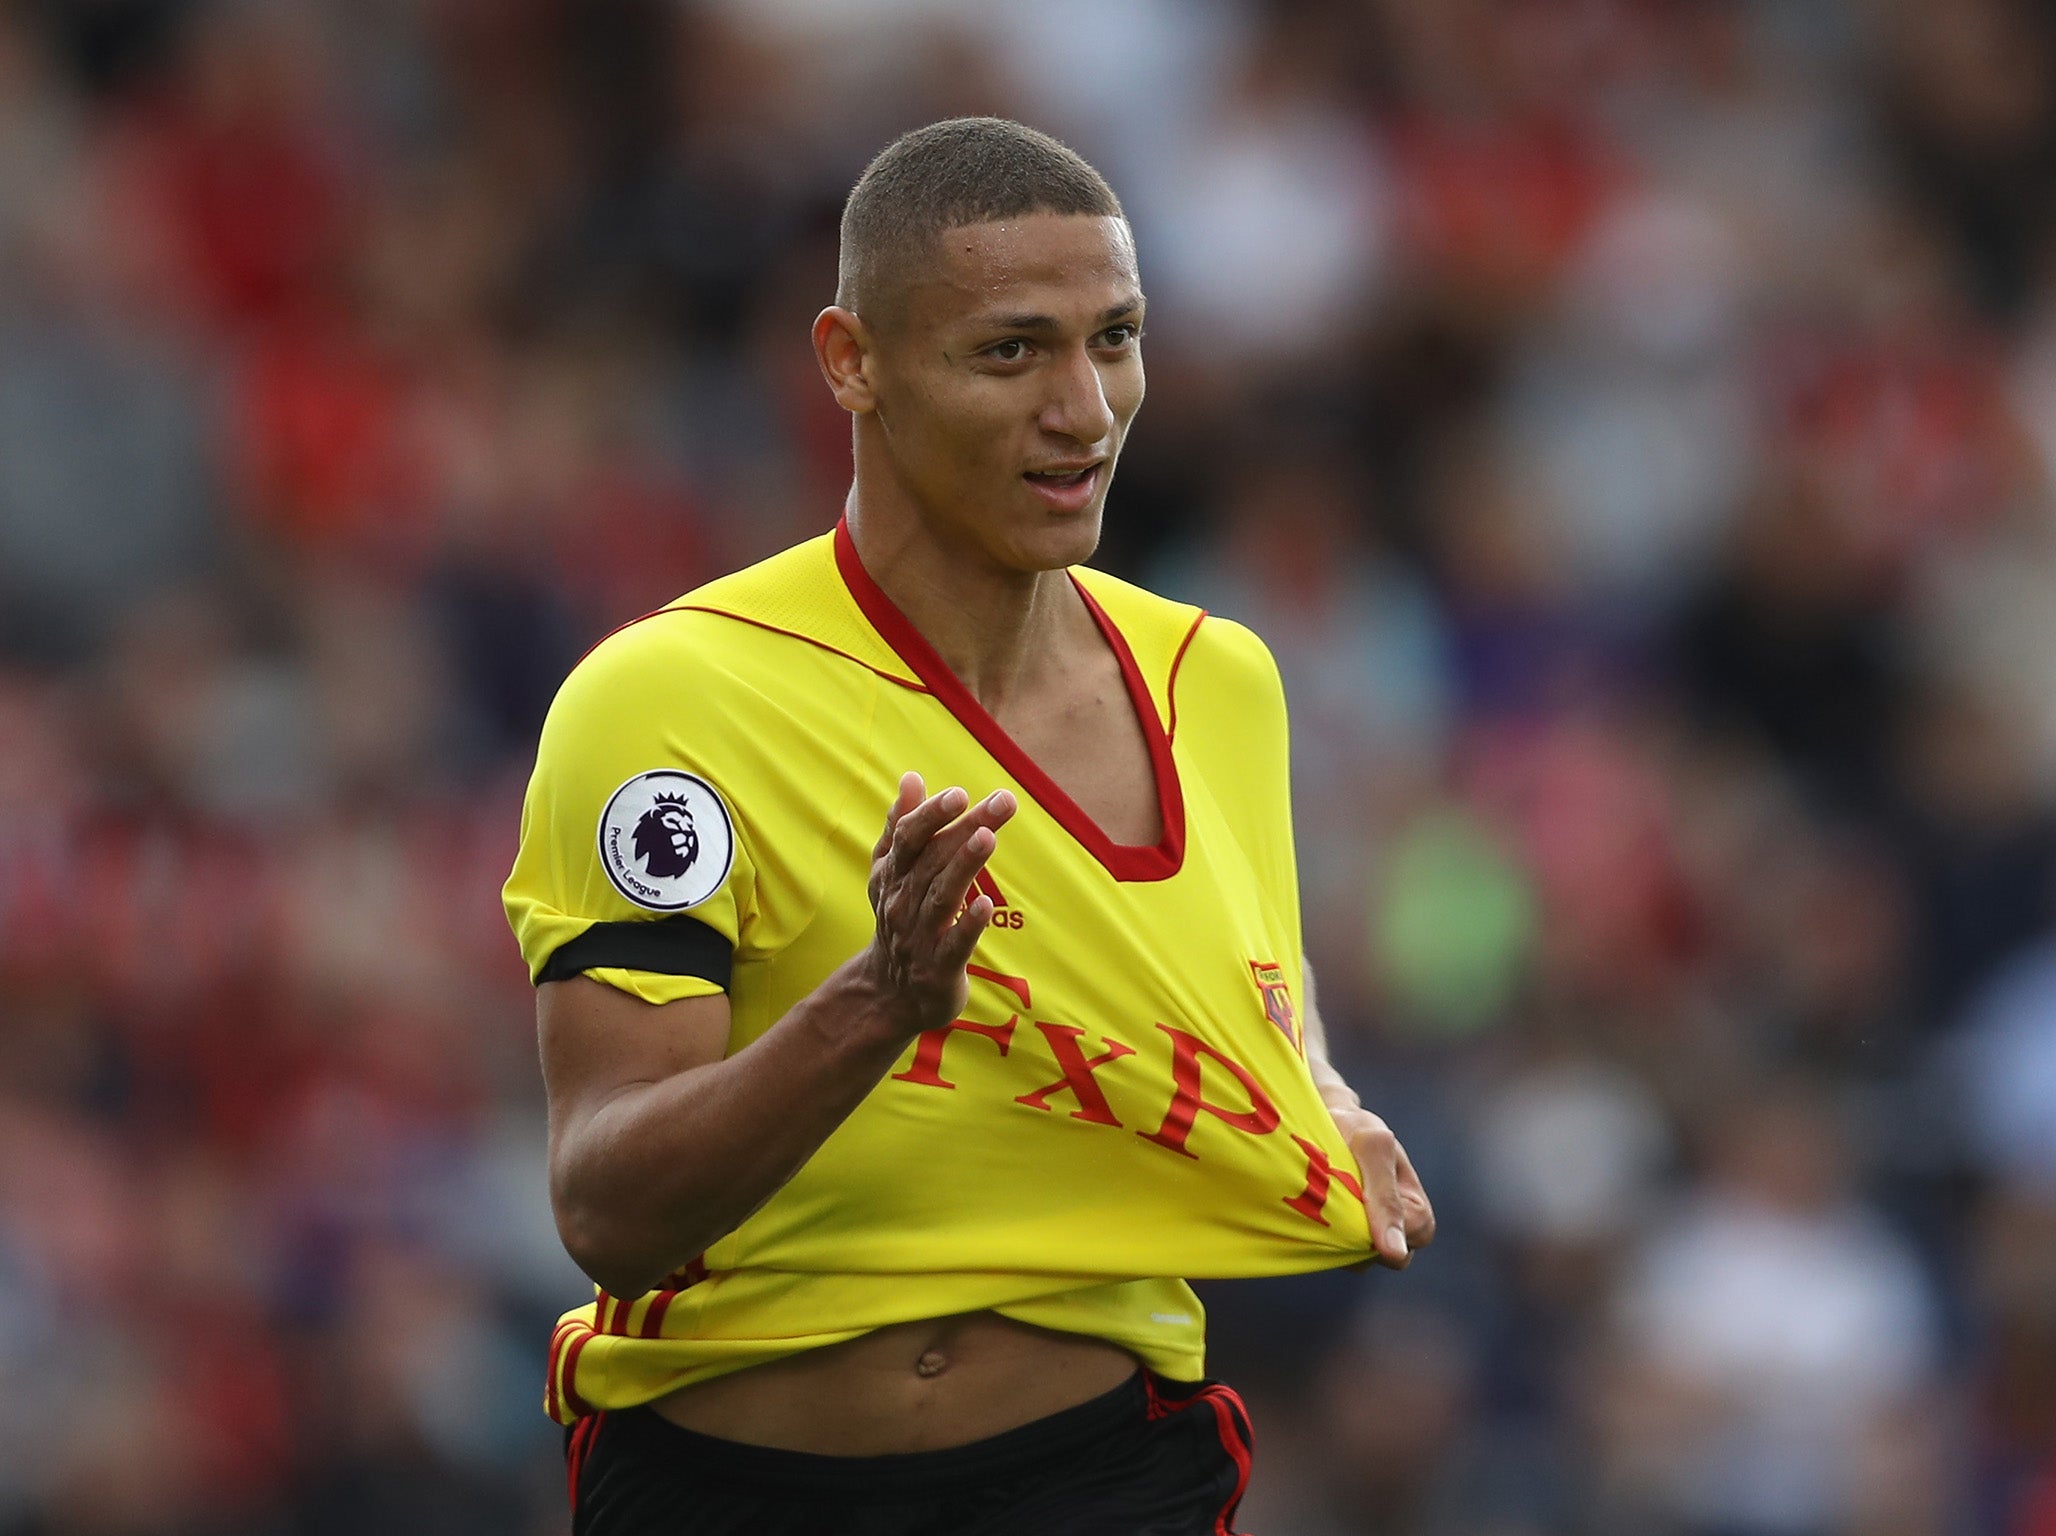 Richarlison looks a real talent